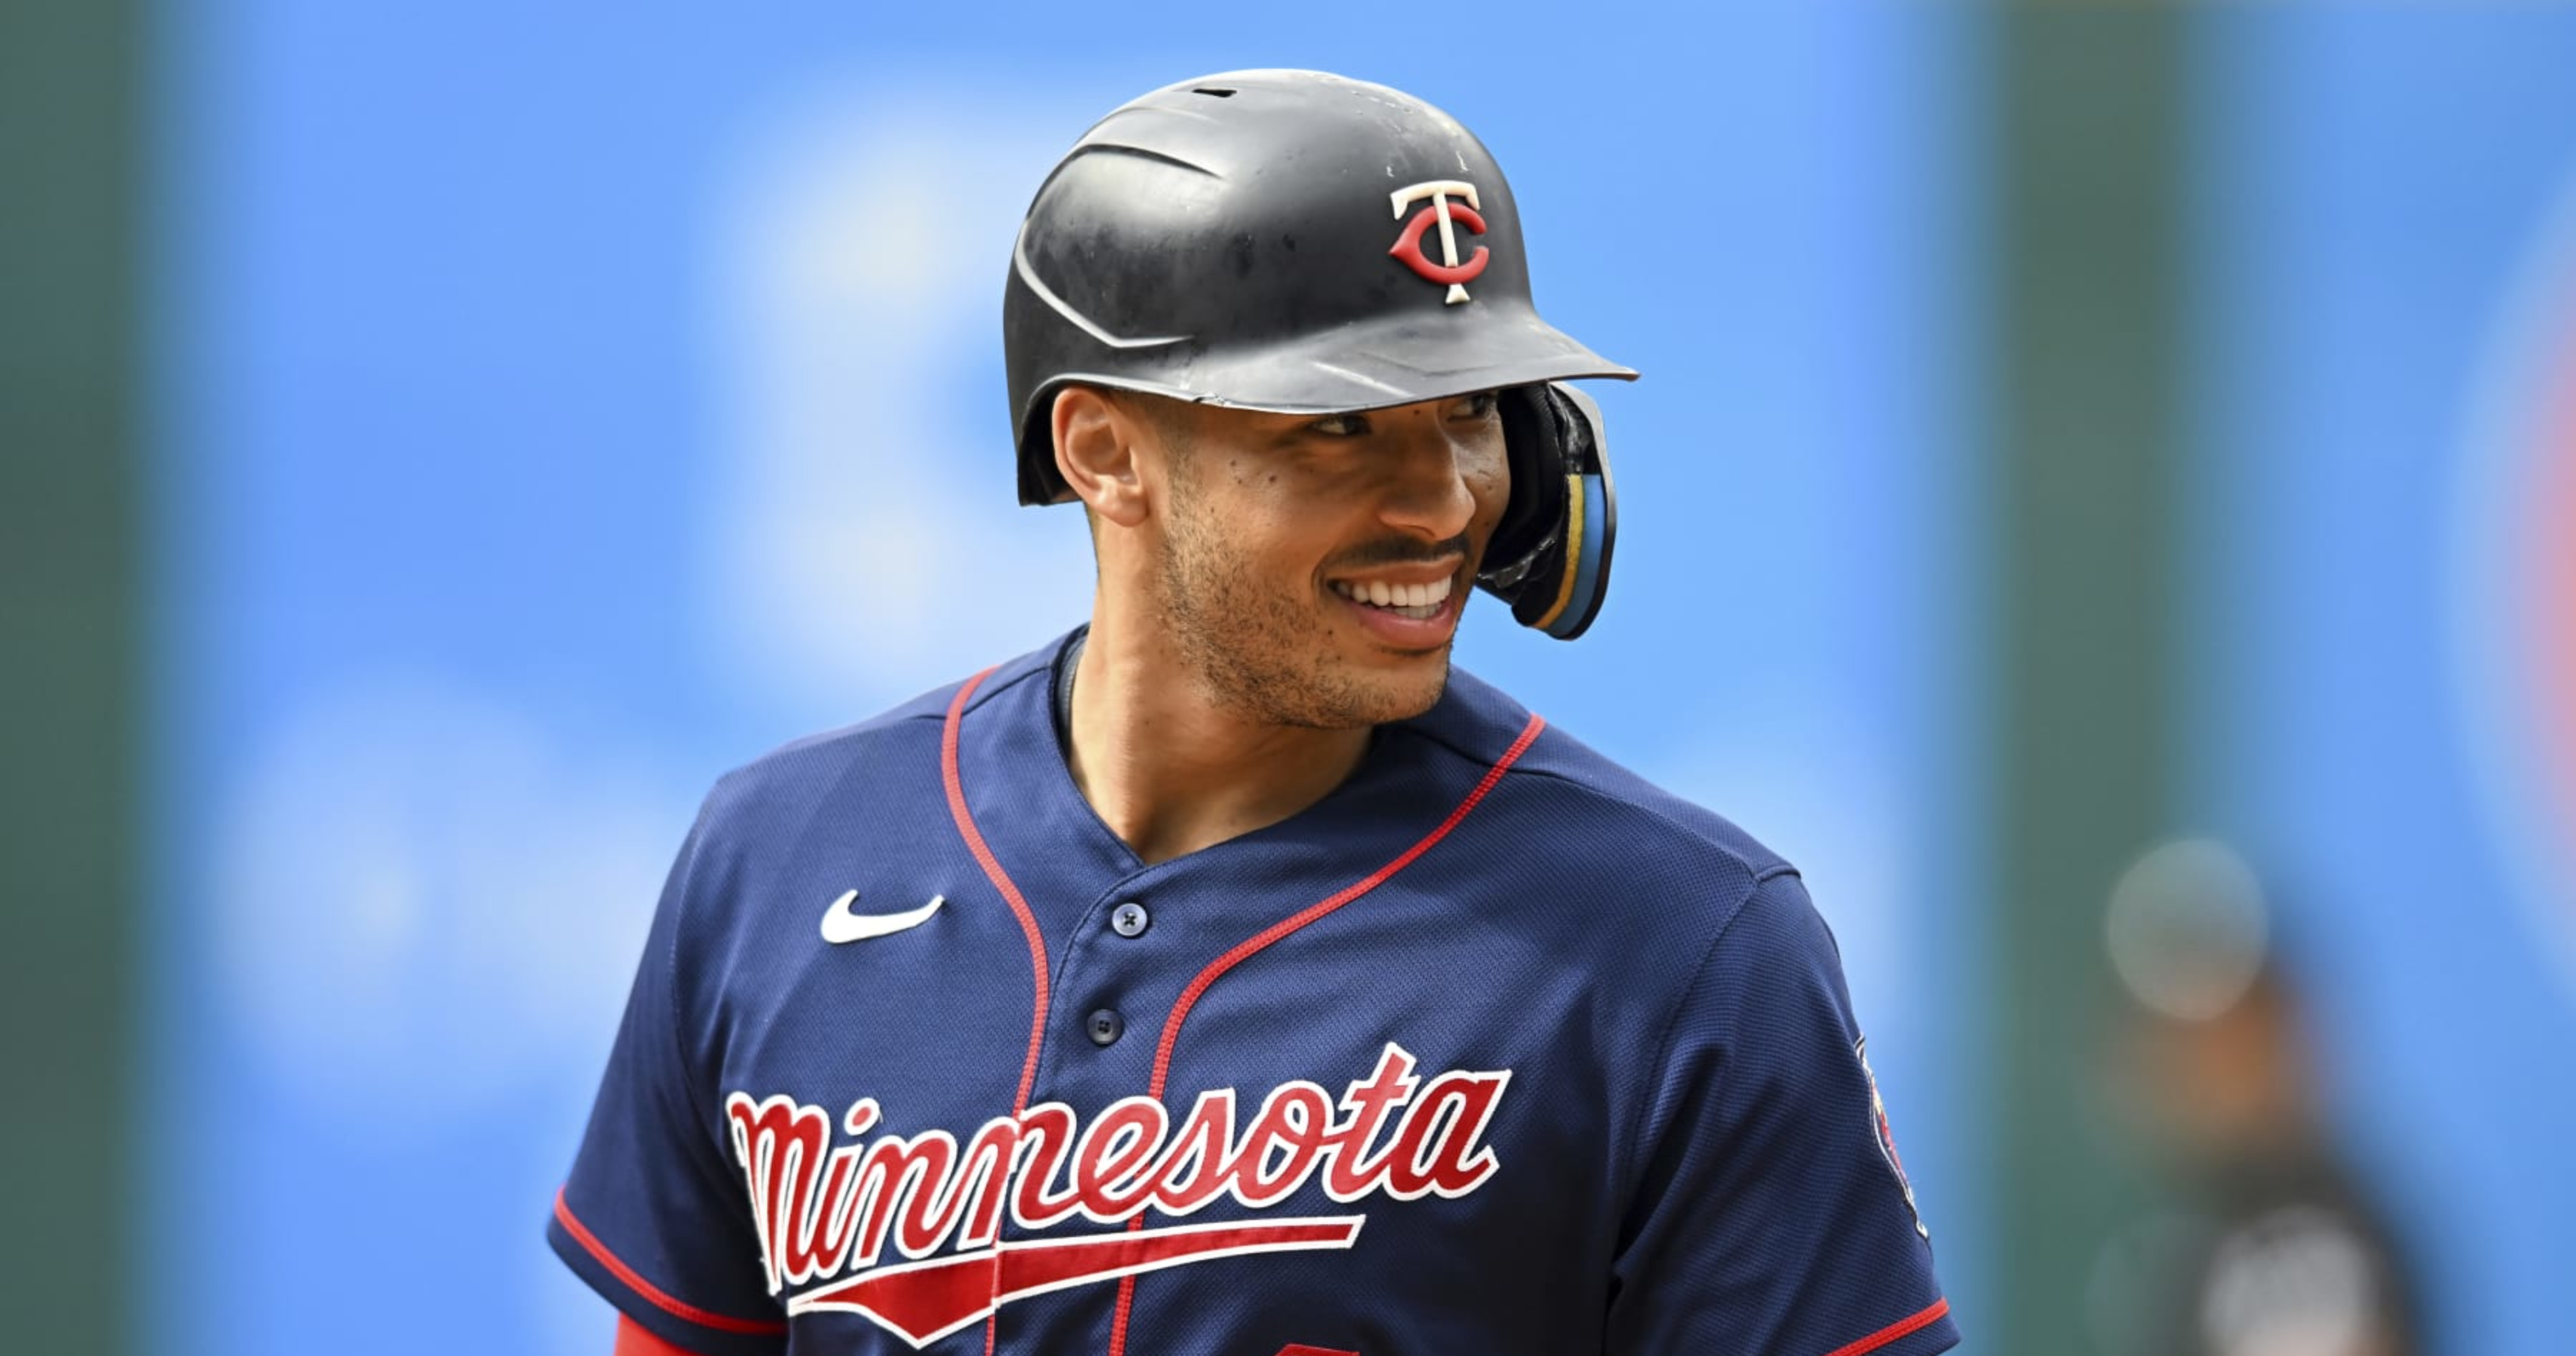 Carlos Correa injury update: Twins star on IL with foot issue as